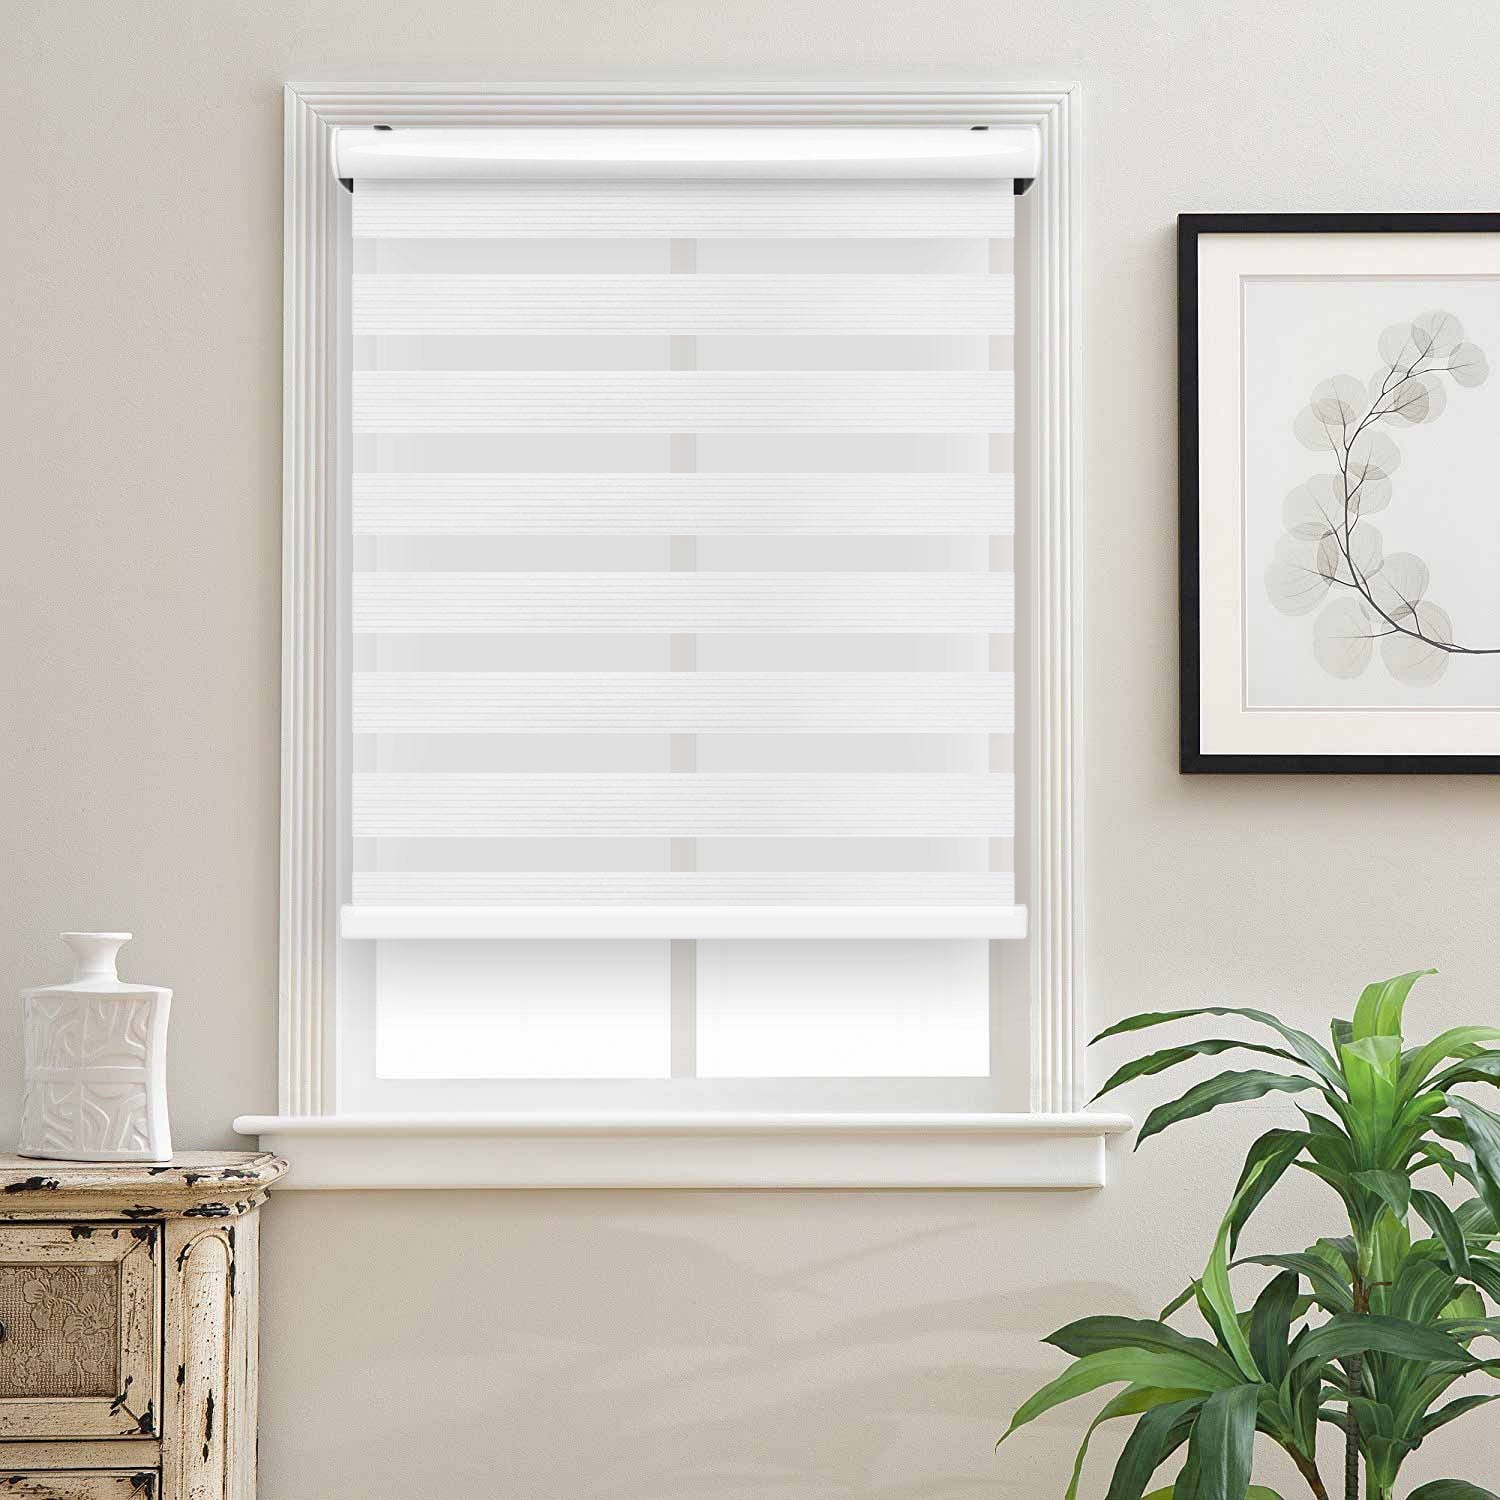 20 to 72 inch Wide WYMO Zebra Blinds for Windows Sheer Horizontal Window Blinds and Shades for Daytime and Nighttime 41 x 64 inch Light Filtering Roller Shades for Windows with White Valence